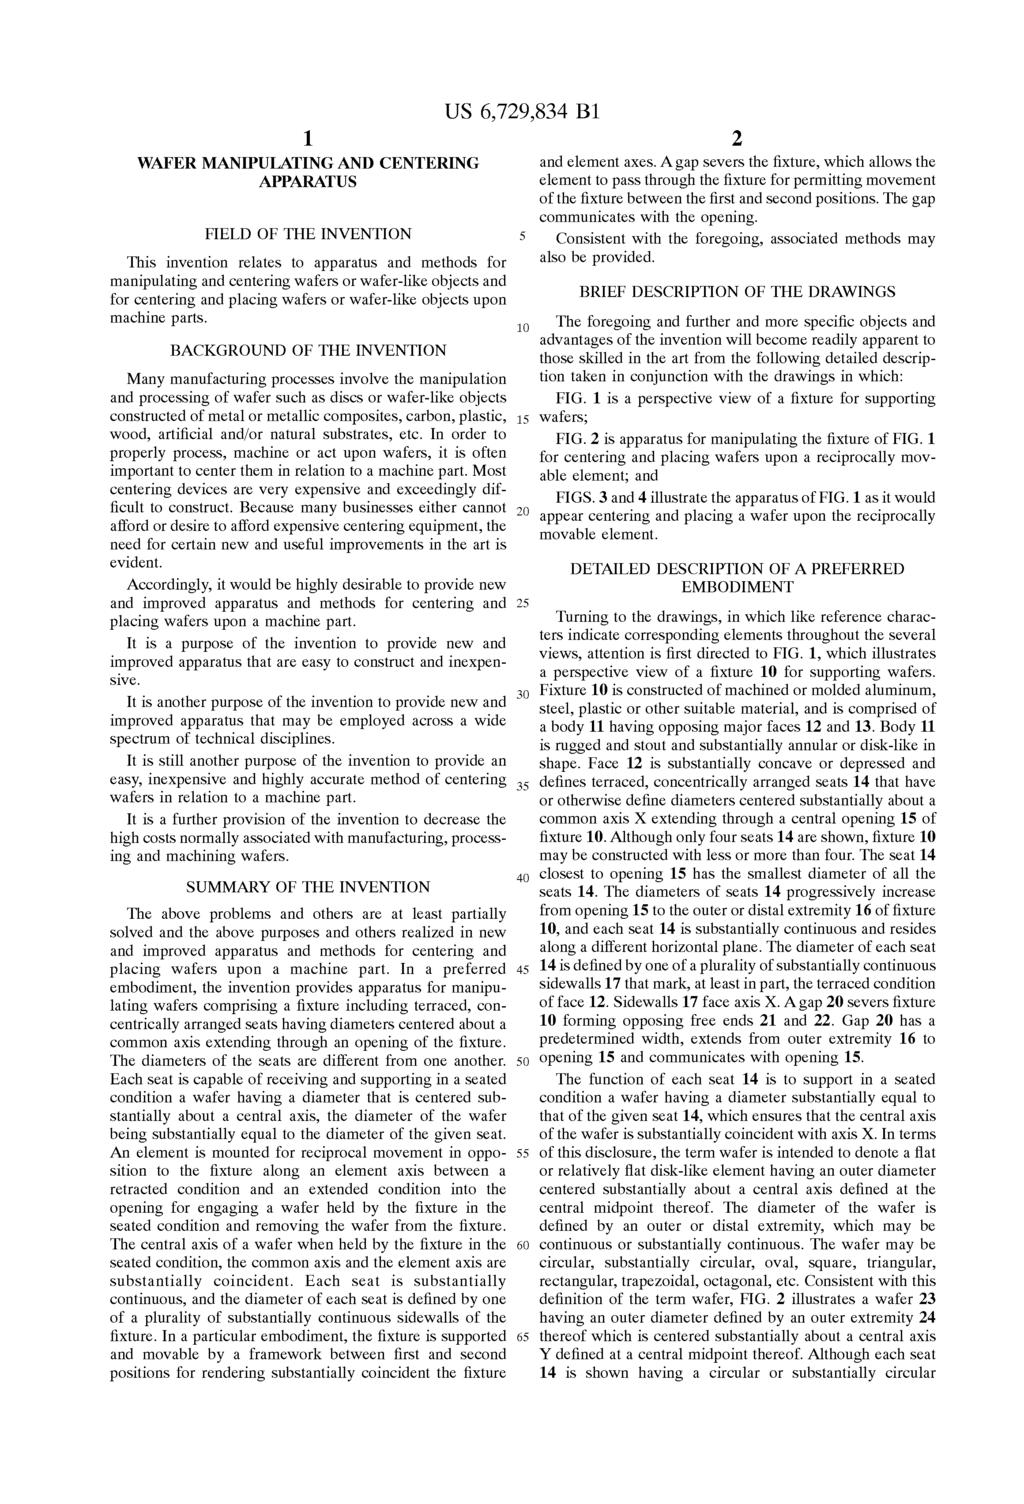 1 WAFER MANIPULATING AND CENTERING APPARATUS FIELD OF THE INVENTION This invention relates to apparatus and methods for manipulating and centering wafers or wafer-like objects and for centering and